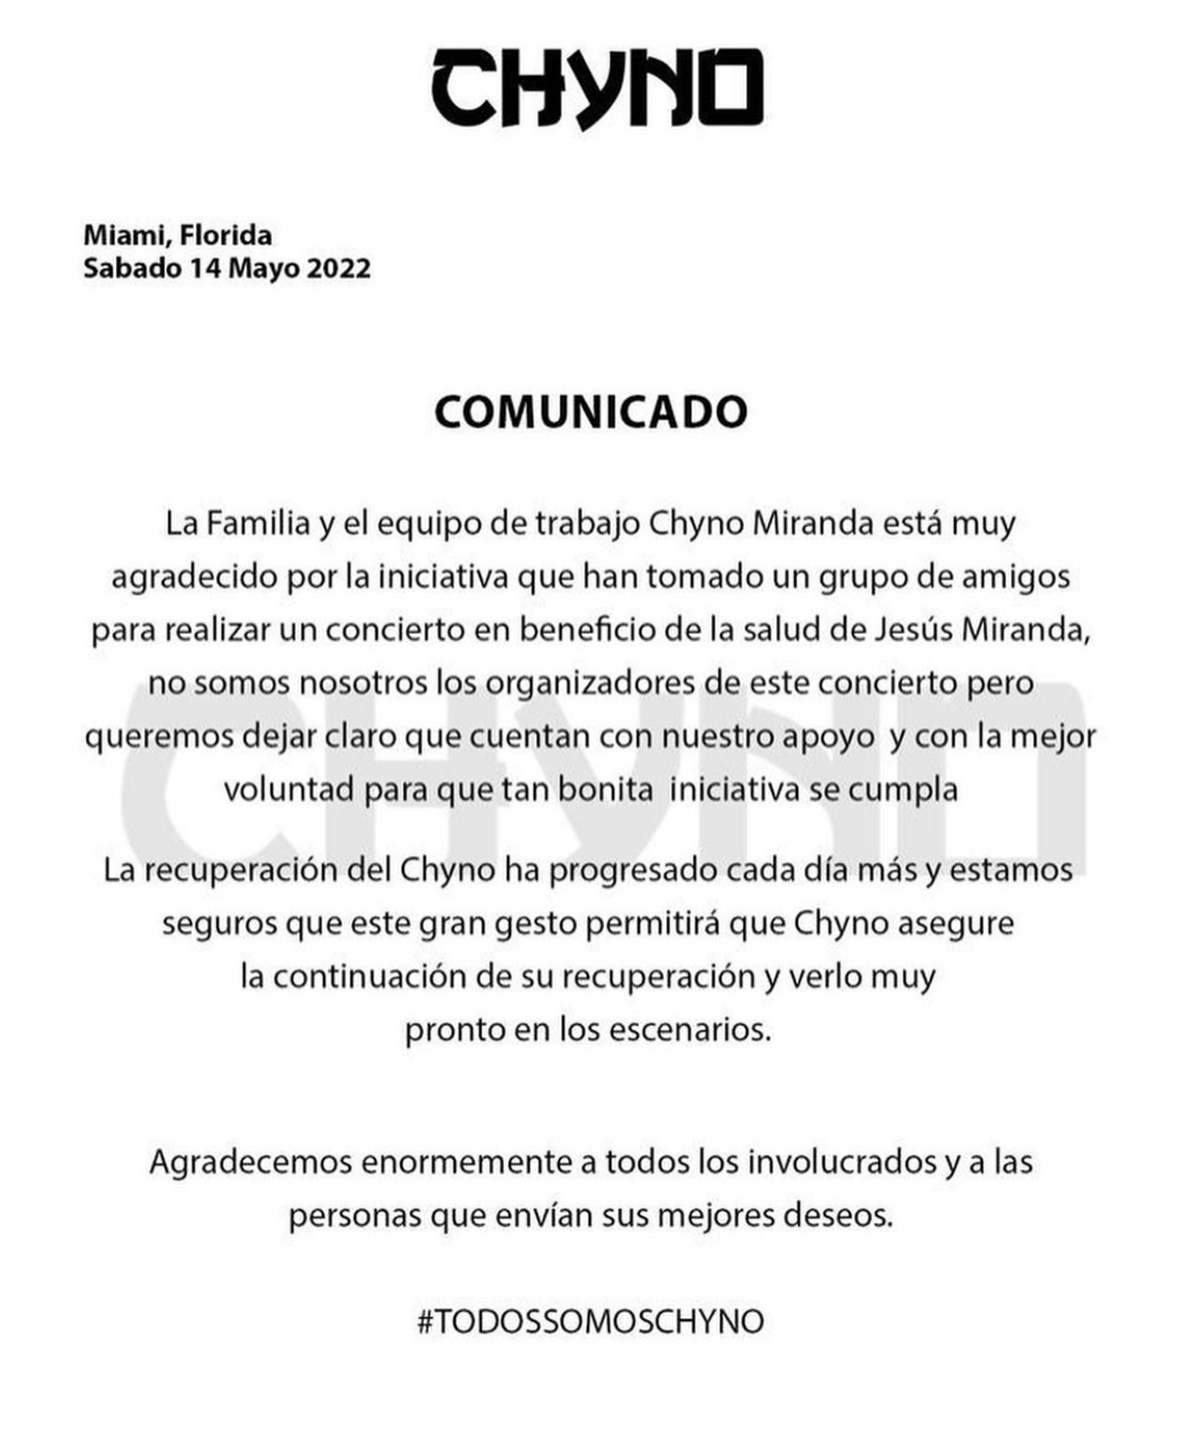 The family supports the benefit concert for Chyno Miranda